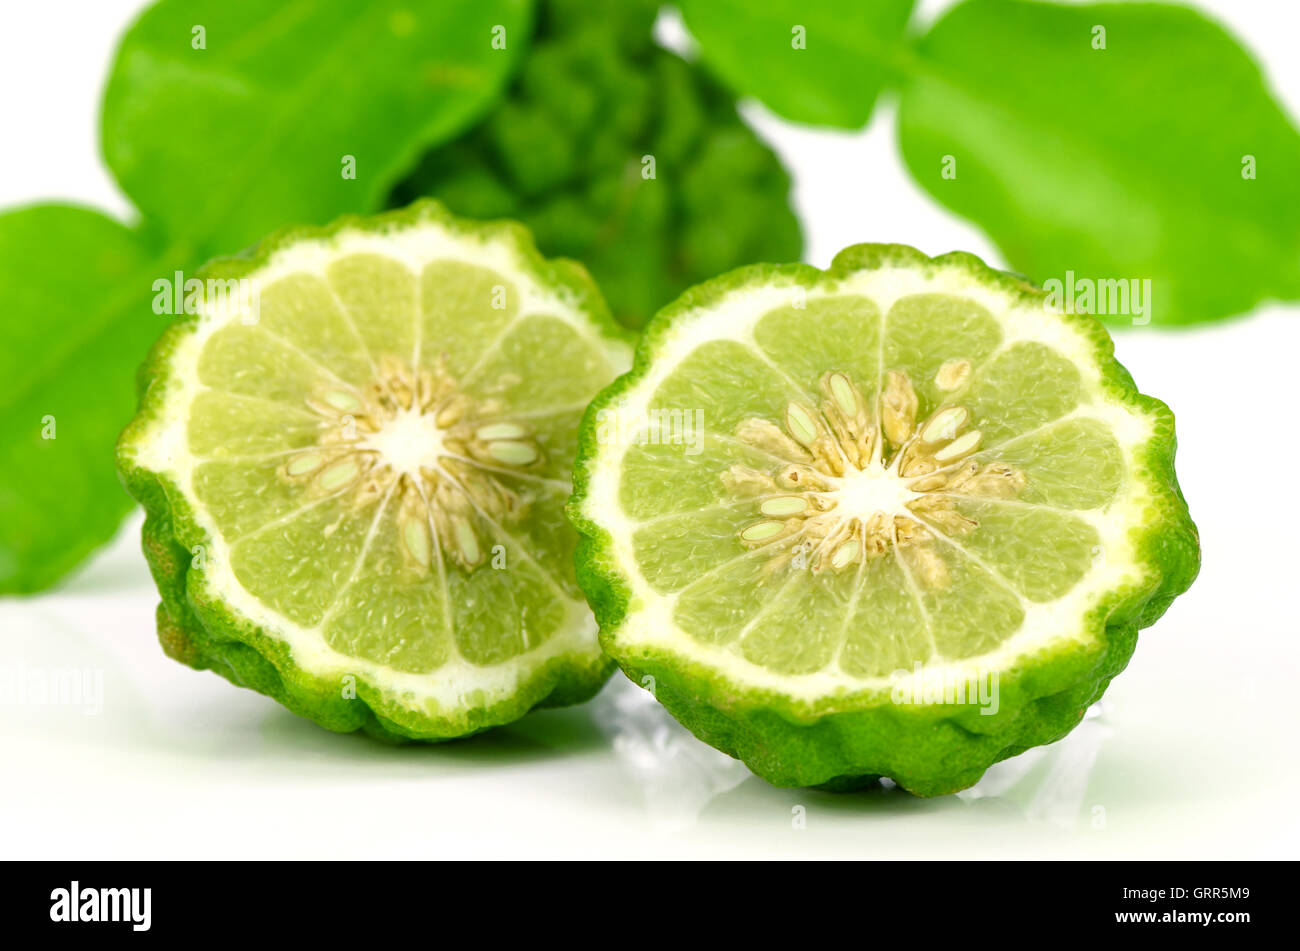 Fresh Fruits and Green Leaves of Kiffir lime or Leech lime (Citrus hystrix DC.) on White Background. Stock Photo